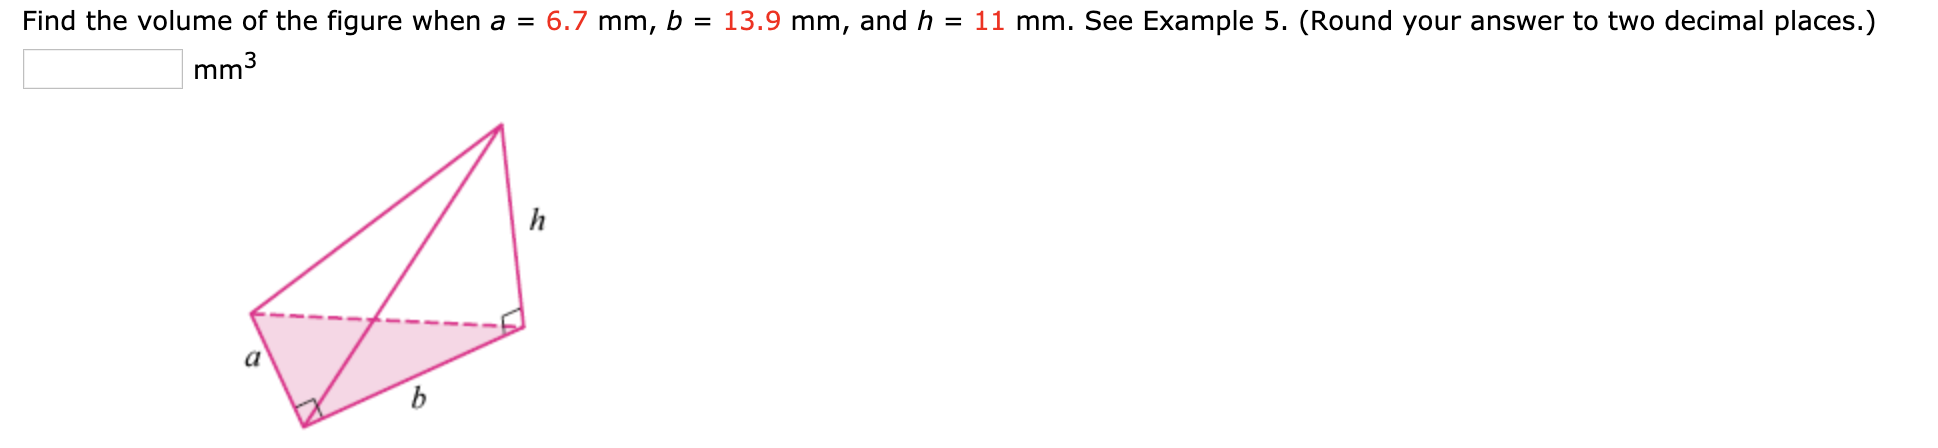 Find the volume of the figure when a = 6.7 mm, b = 13.9 mm, and h = 11 mm. See Example 5. (Round your answer to two decimal places.)
mm3
